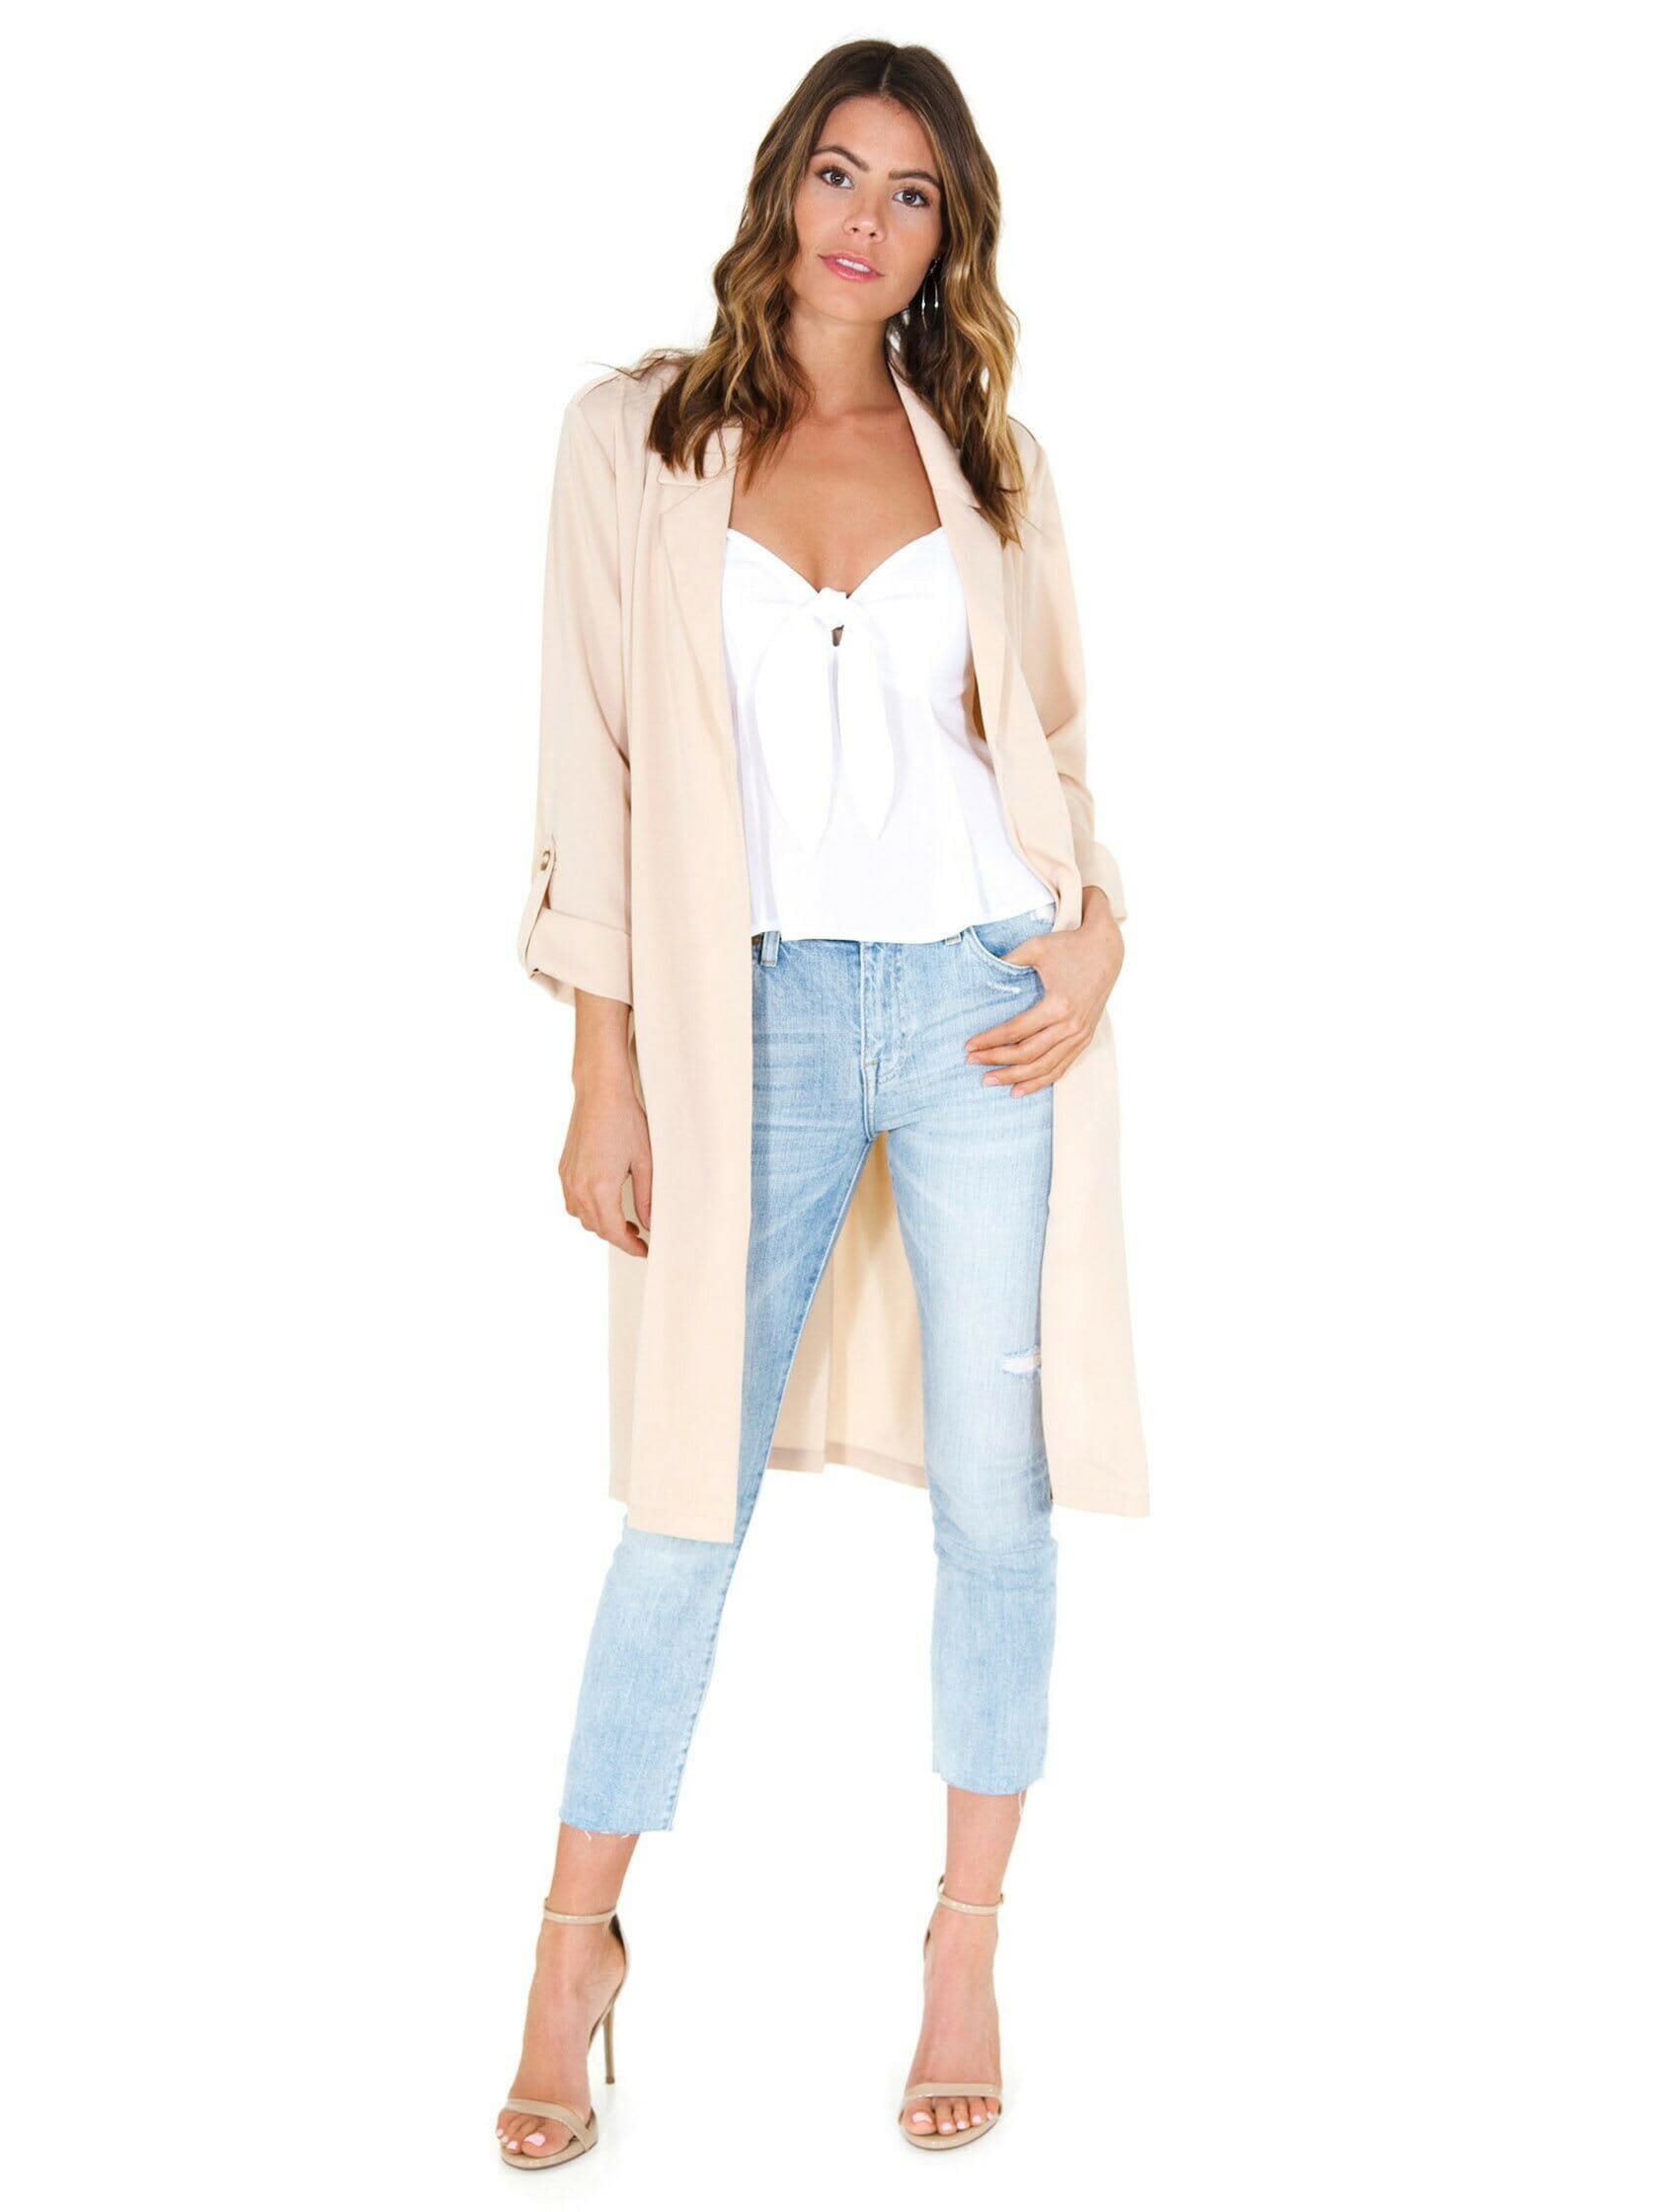 FashionPass Grace Trench in Cream